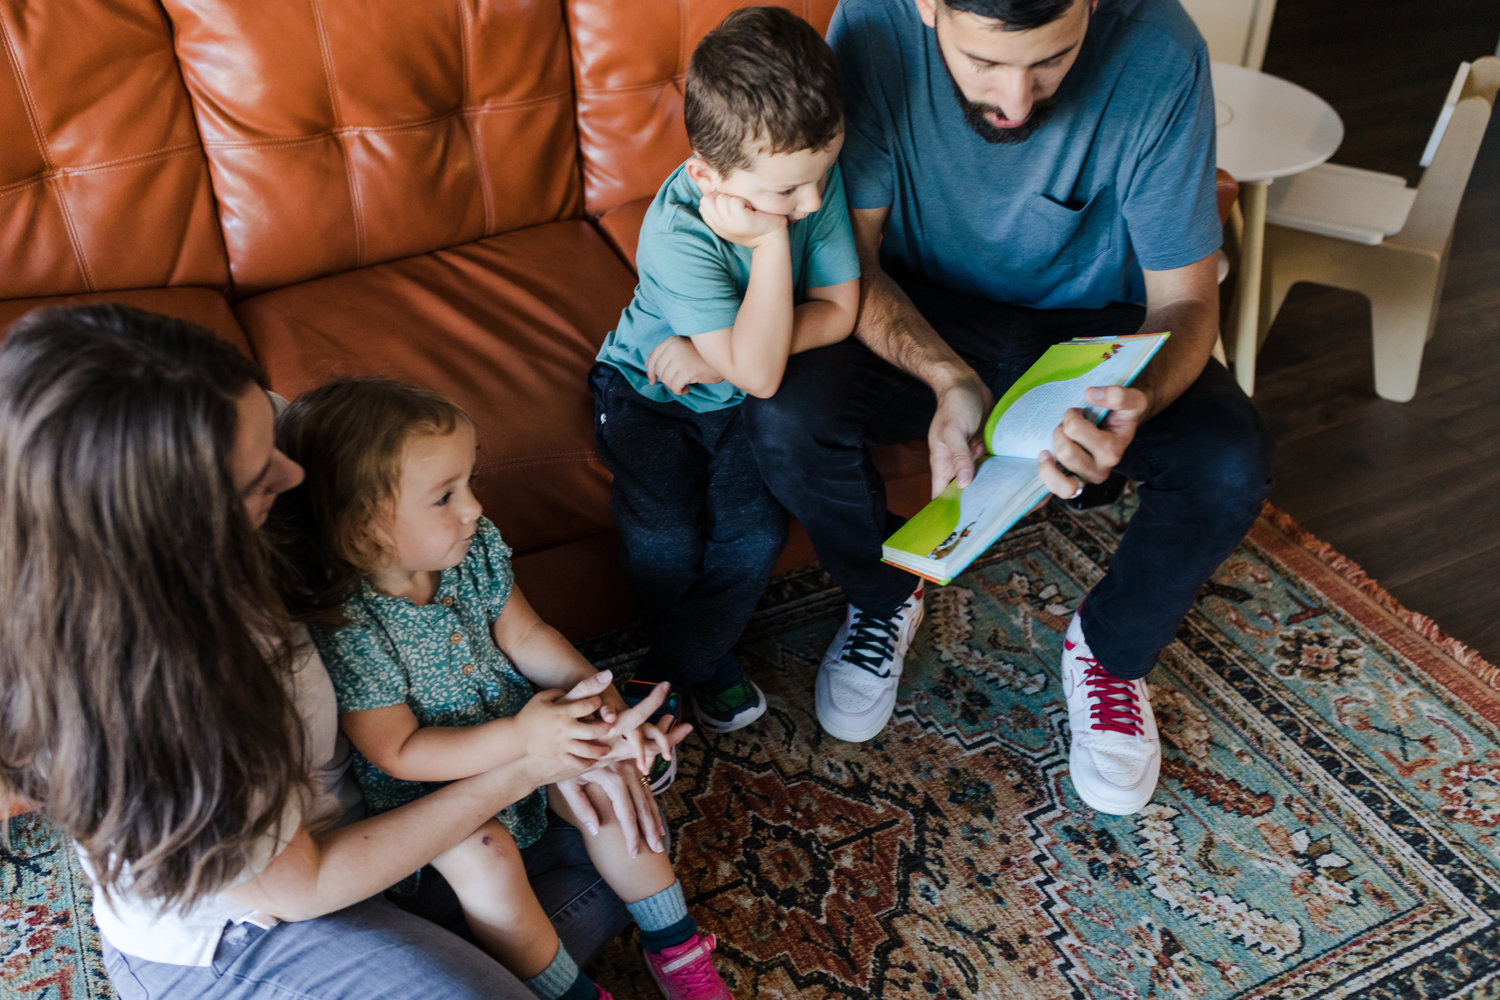 The Moncada family in their home. (Southeastern Baptist Theological Seminary/Rebecca Hankins)